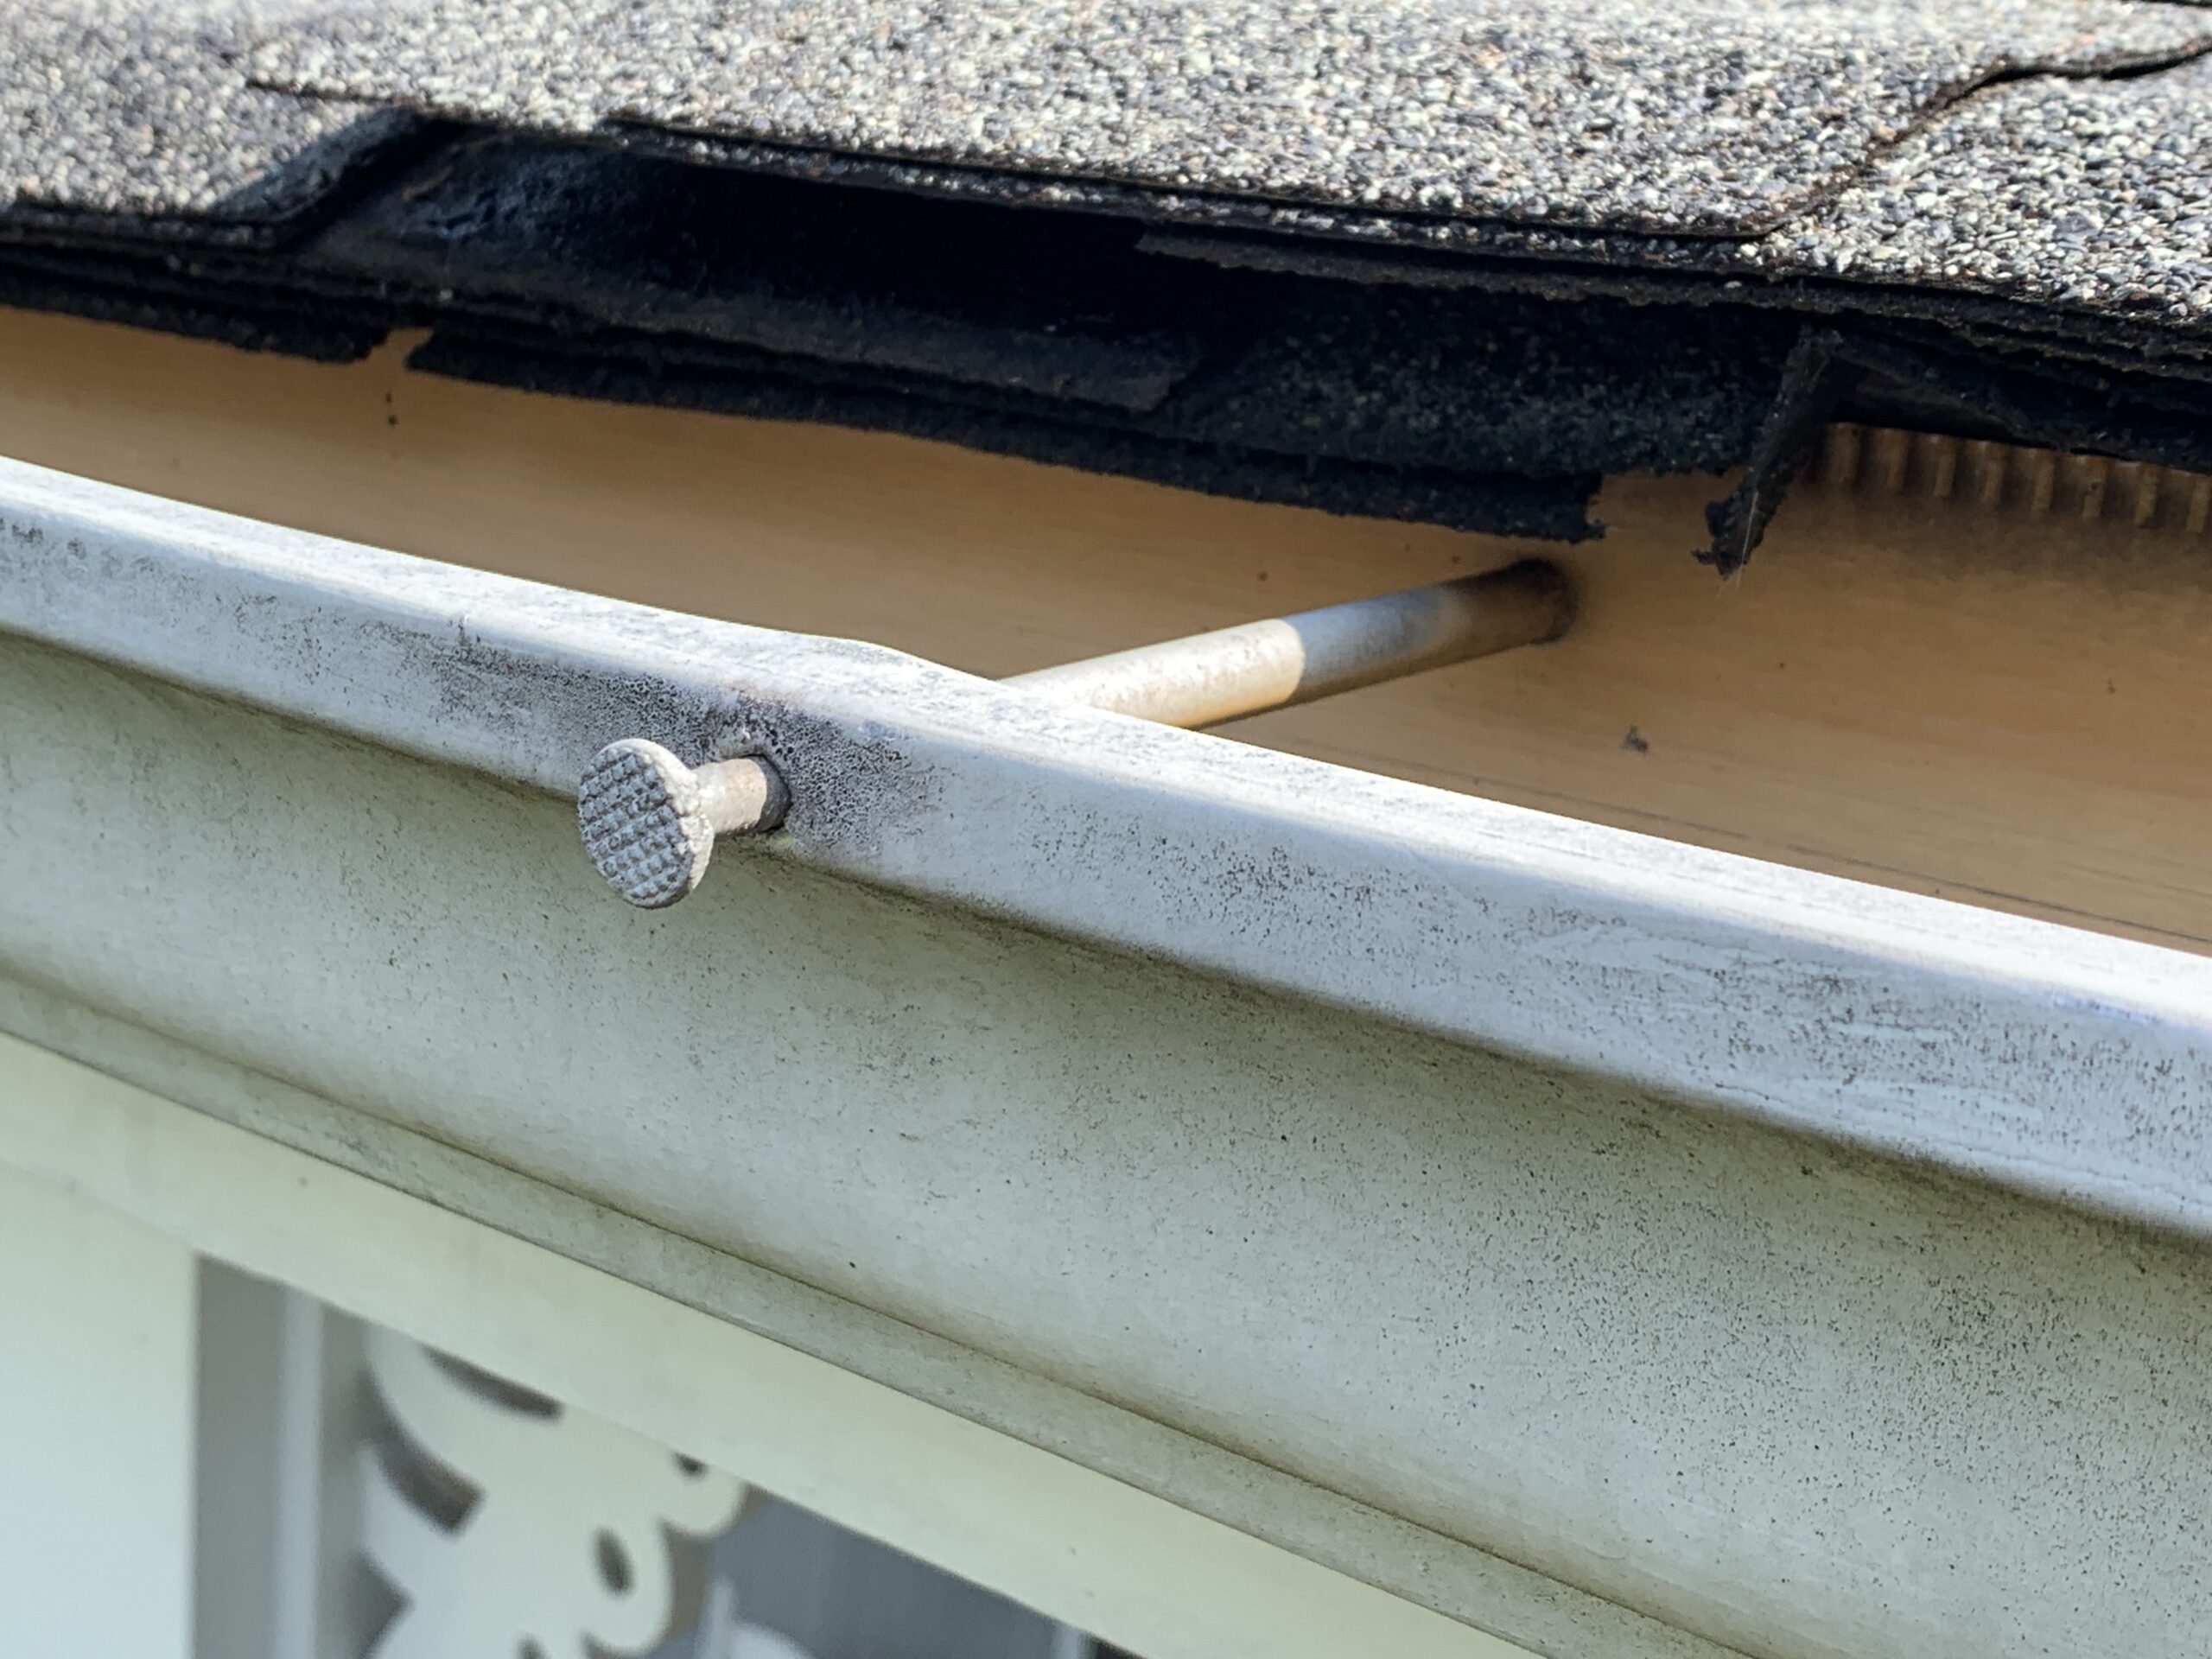 These old style gutters with spikes showed signs of age and where. They leak from the joints and miters and appear to have had some impacts and are discolored